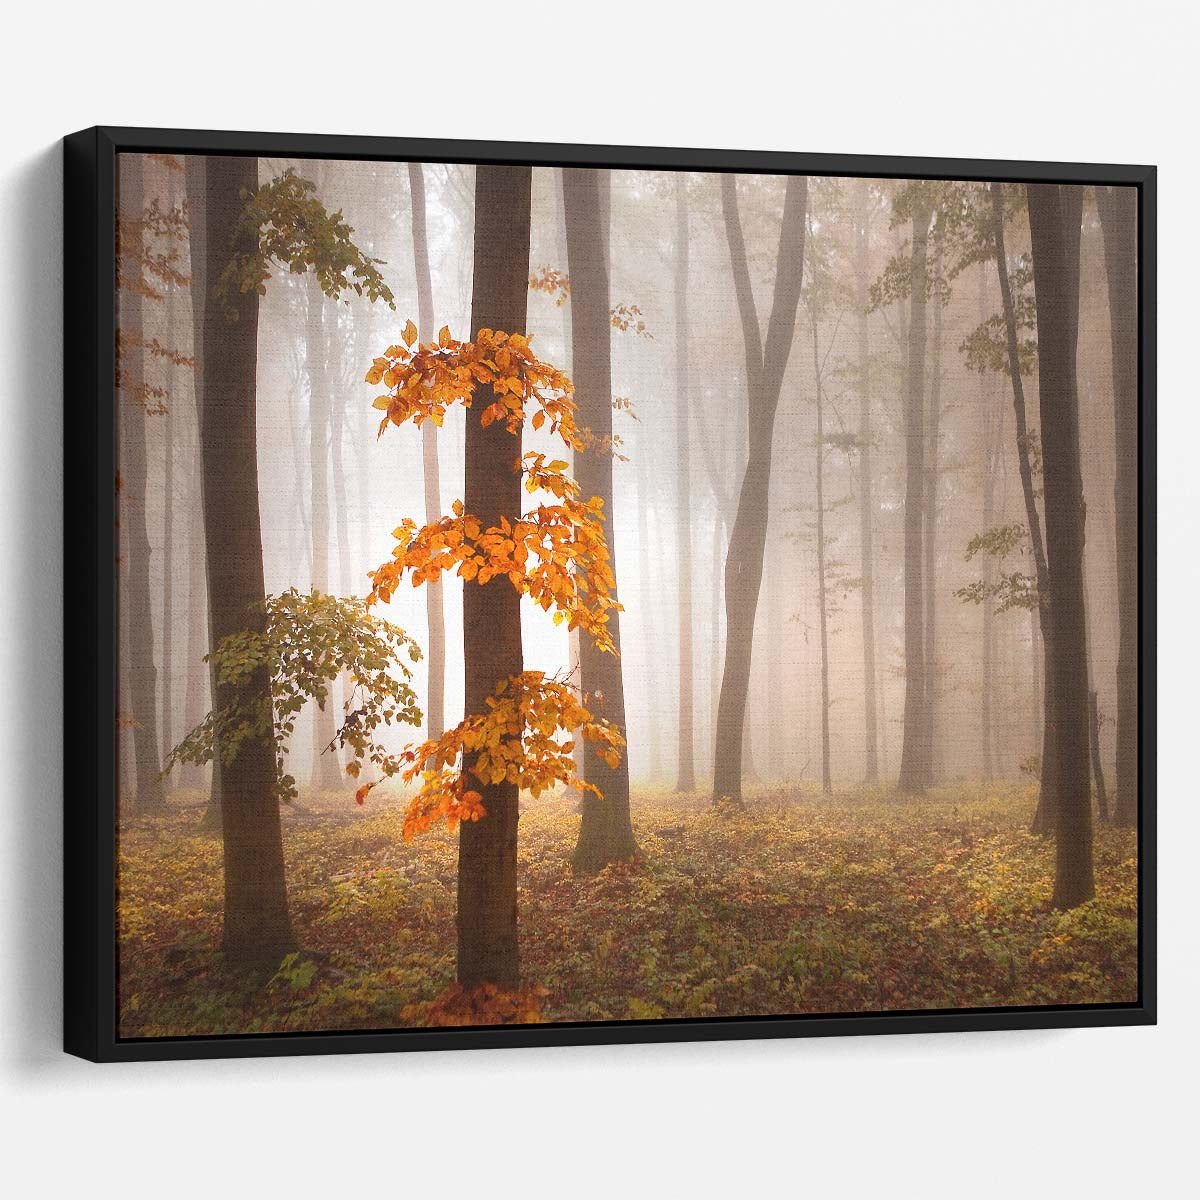 Misty Autumn Swabian Alb Forest Wall Art by Luxuriance Designs. Made in USA.